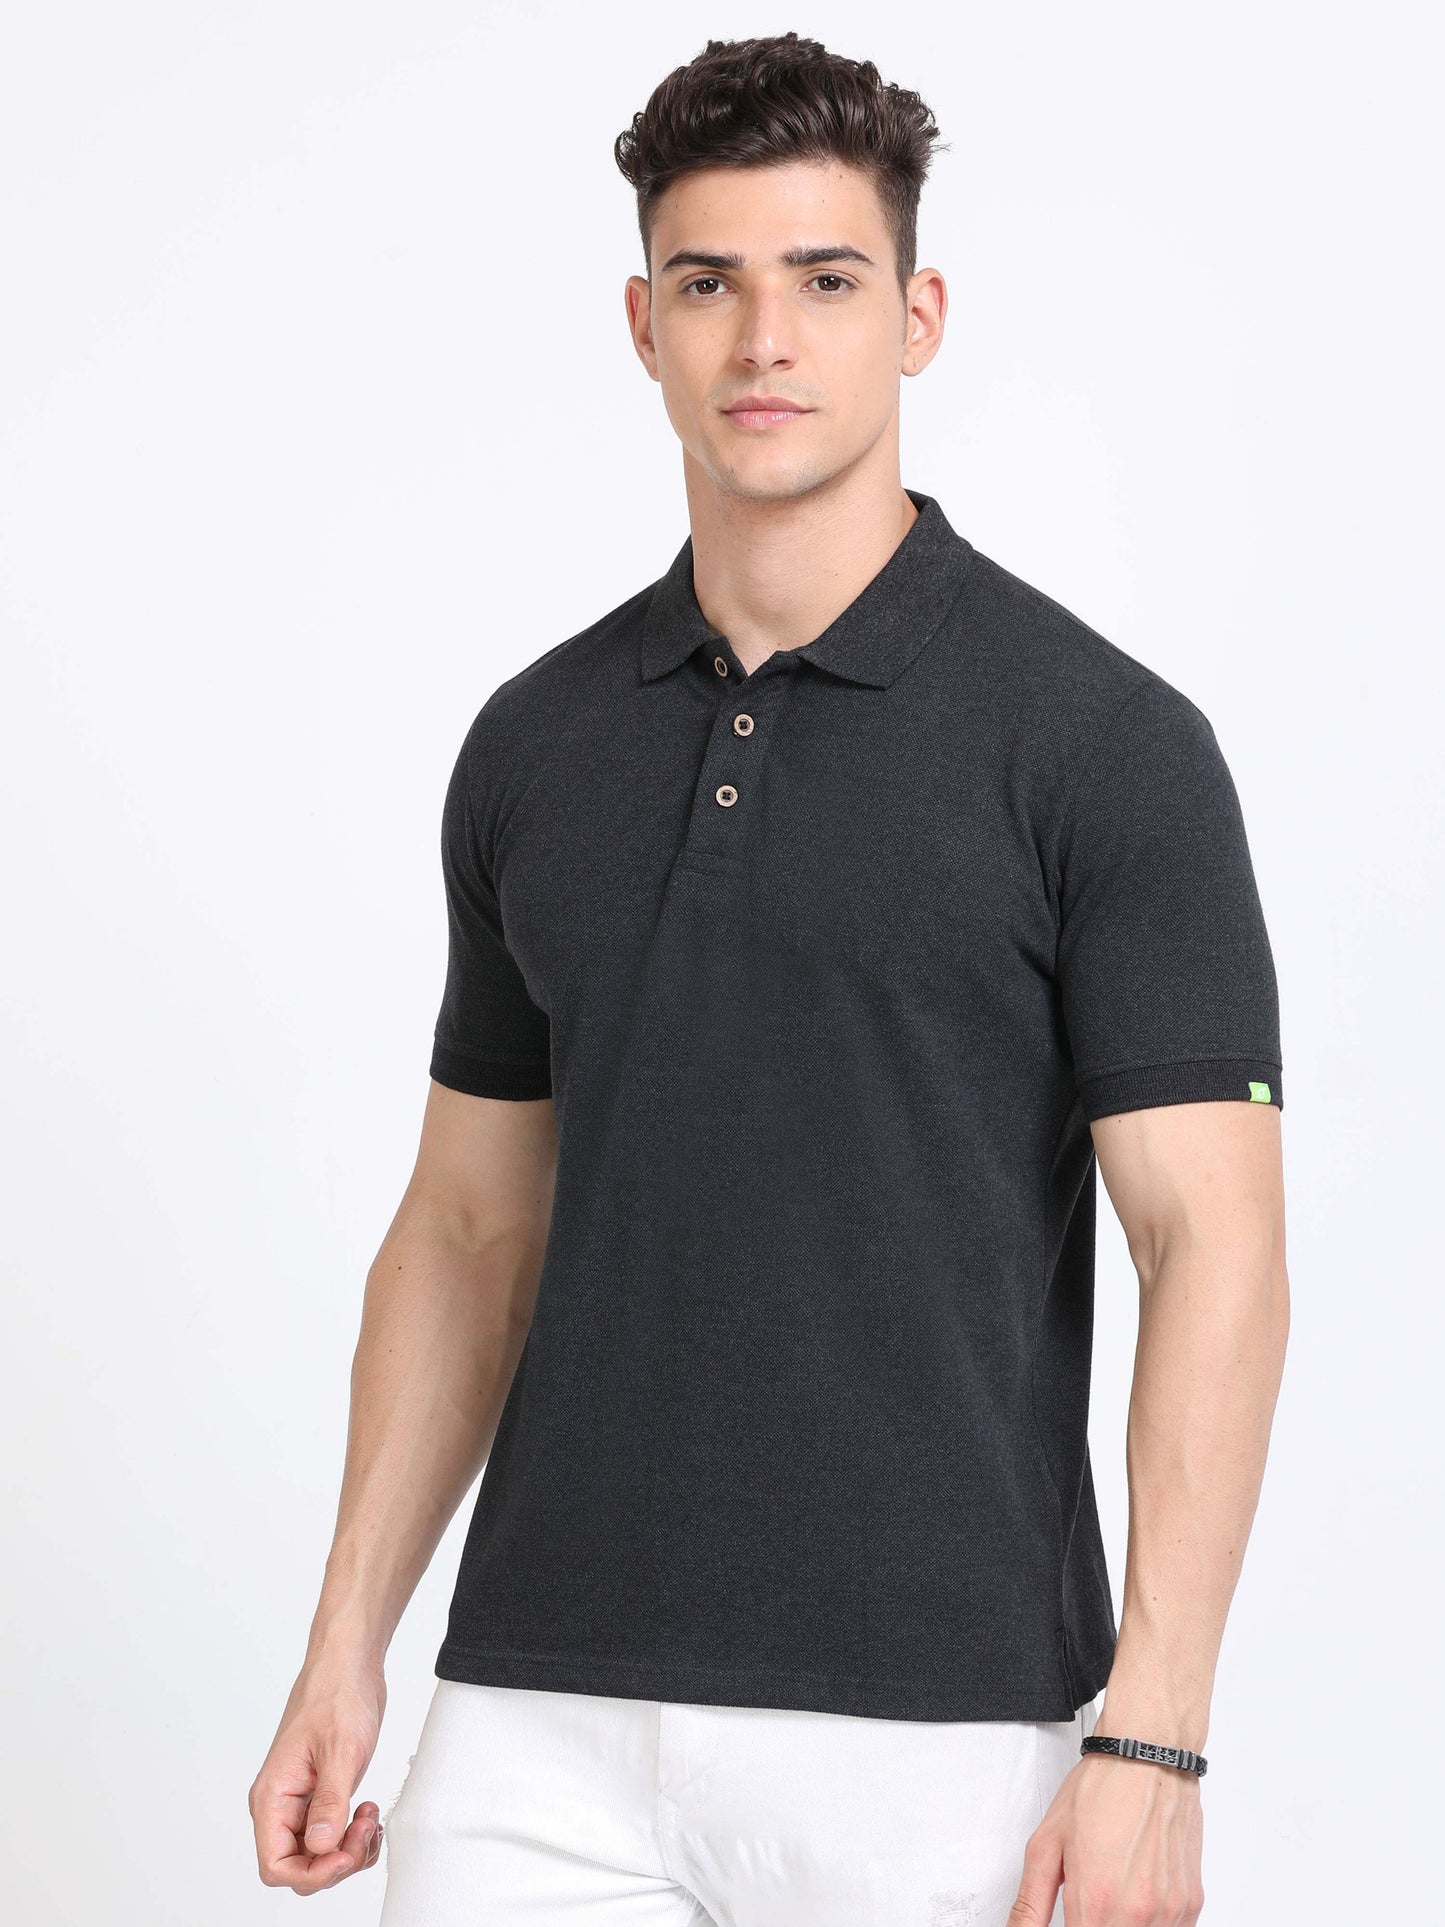 Sustainable Charcoal Cotton Polo T Shirt